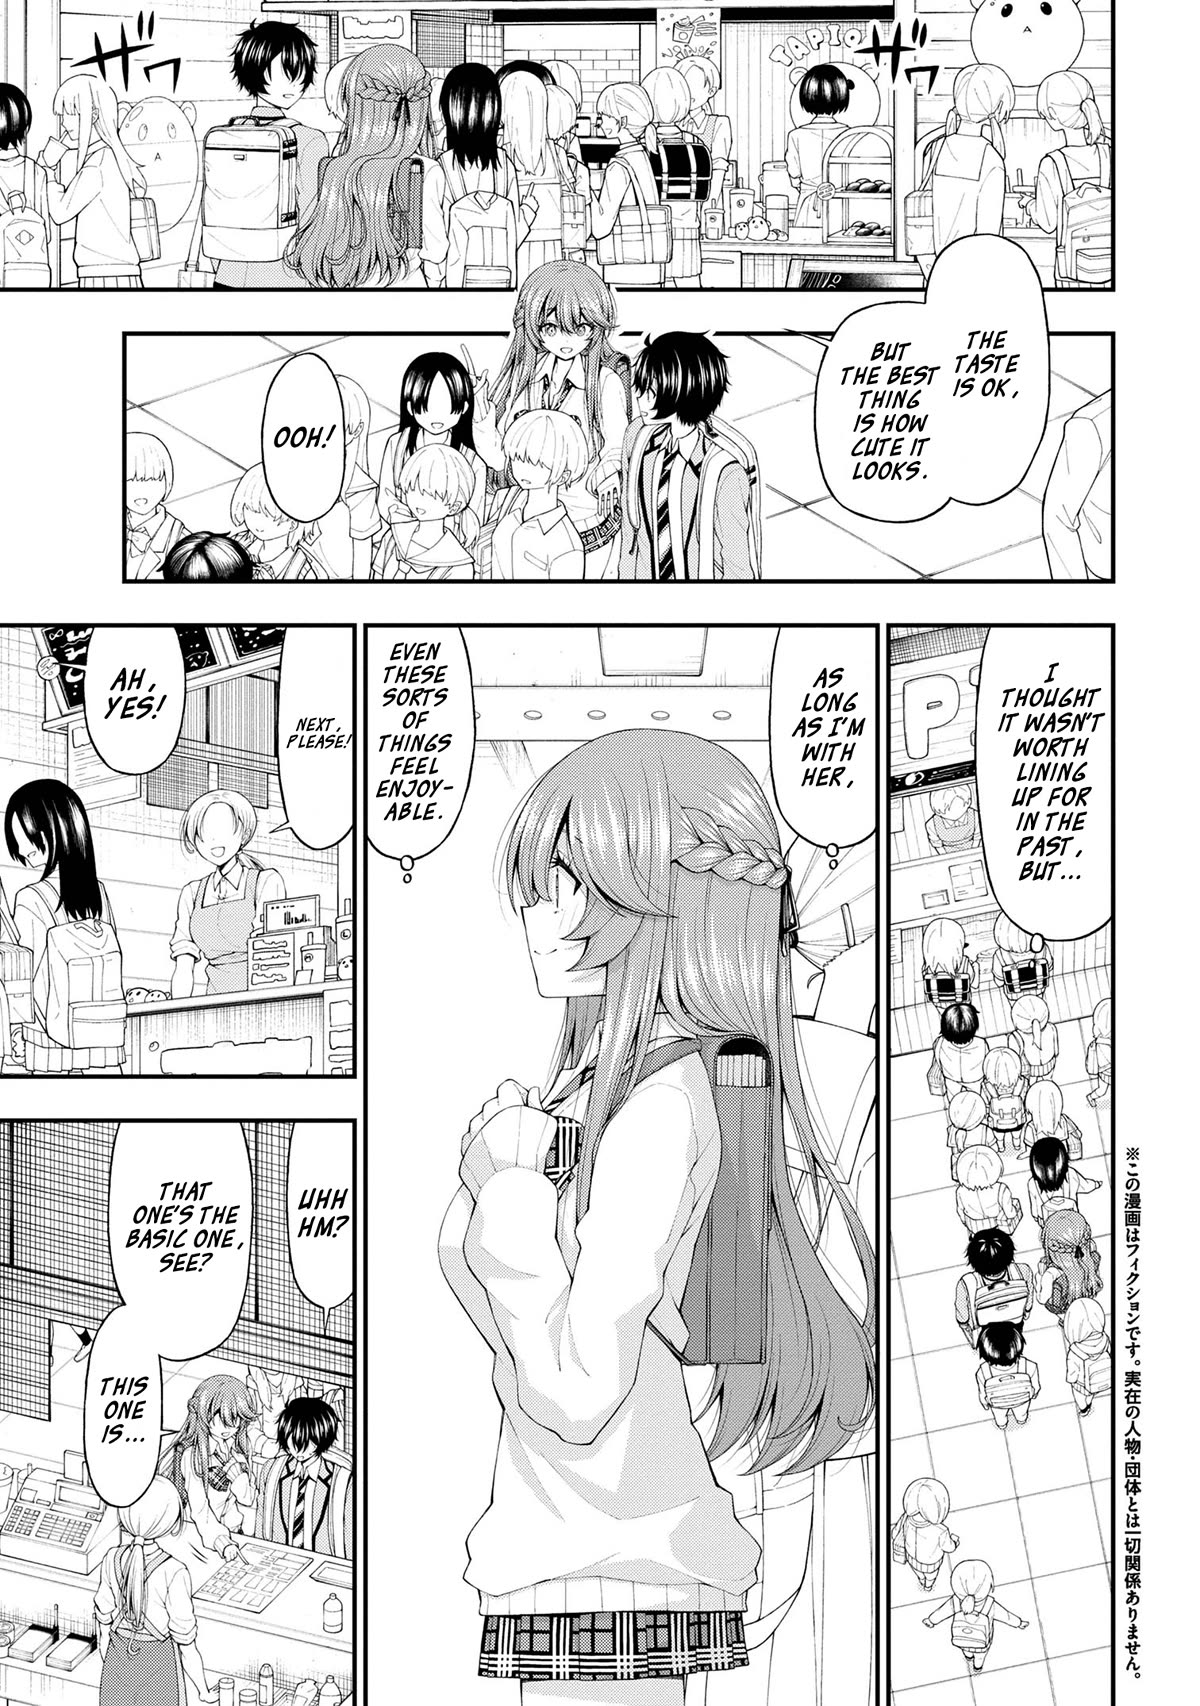 The Gal Who Was Meant to Confess to Me as a Game Punishment - chapter 14 - #3